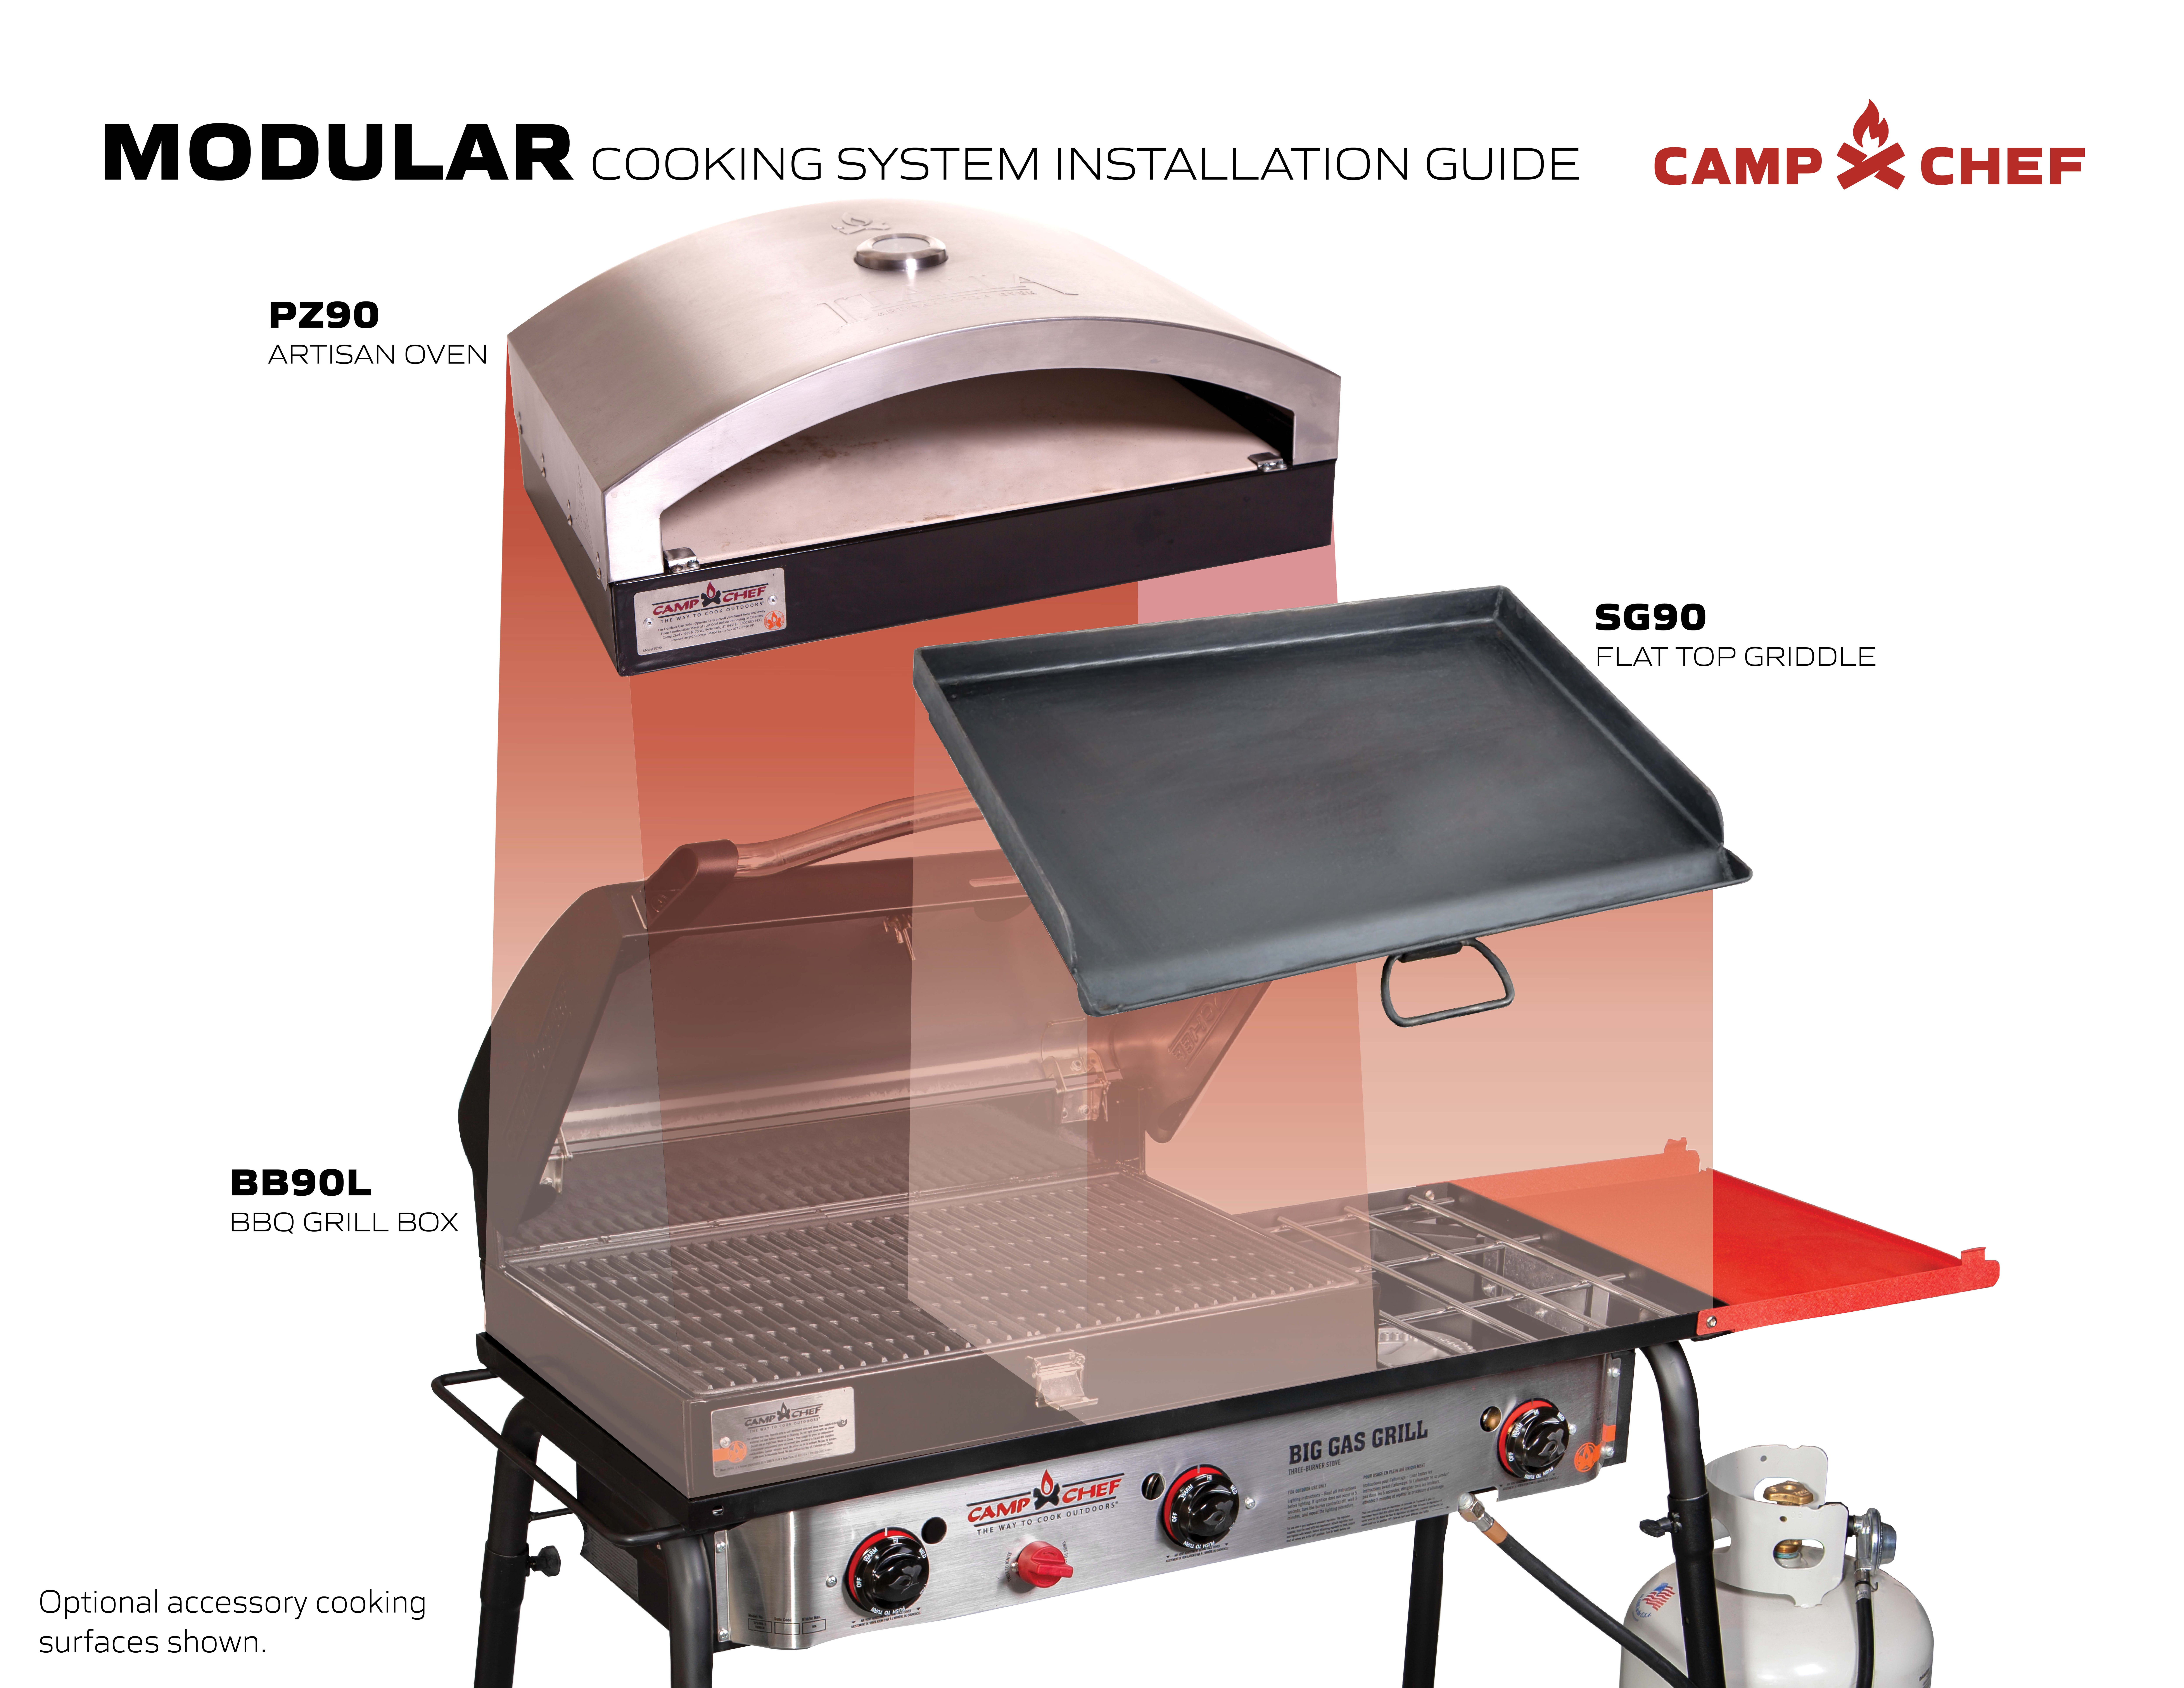 Camp Chef Big Gas Grill 16 Outdoor Stove with BBQ Box Accessory, SPG90B, 90,000 BTU Propane - image 11 of 17